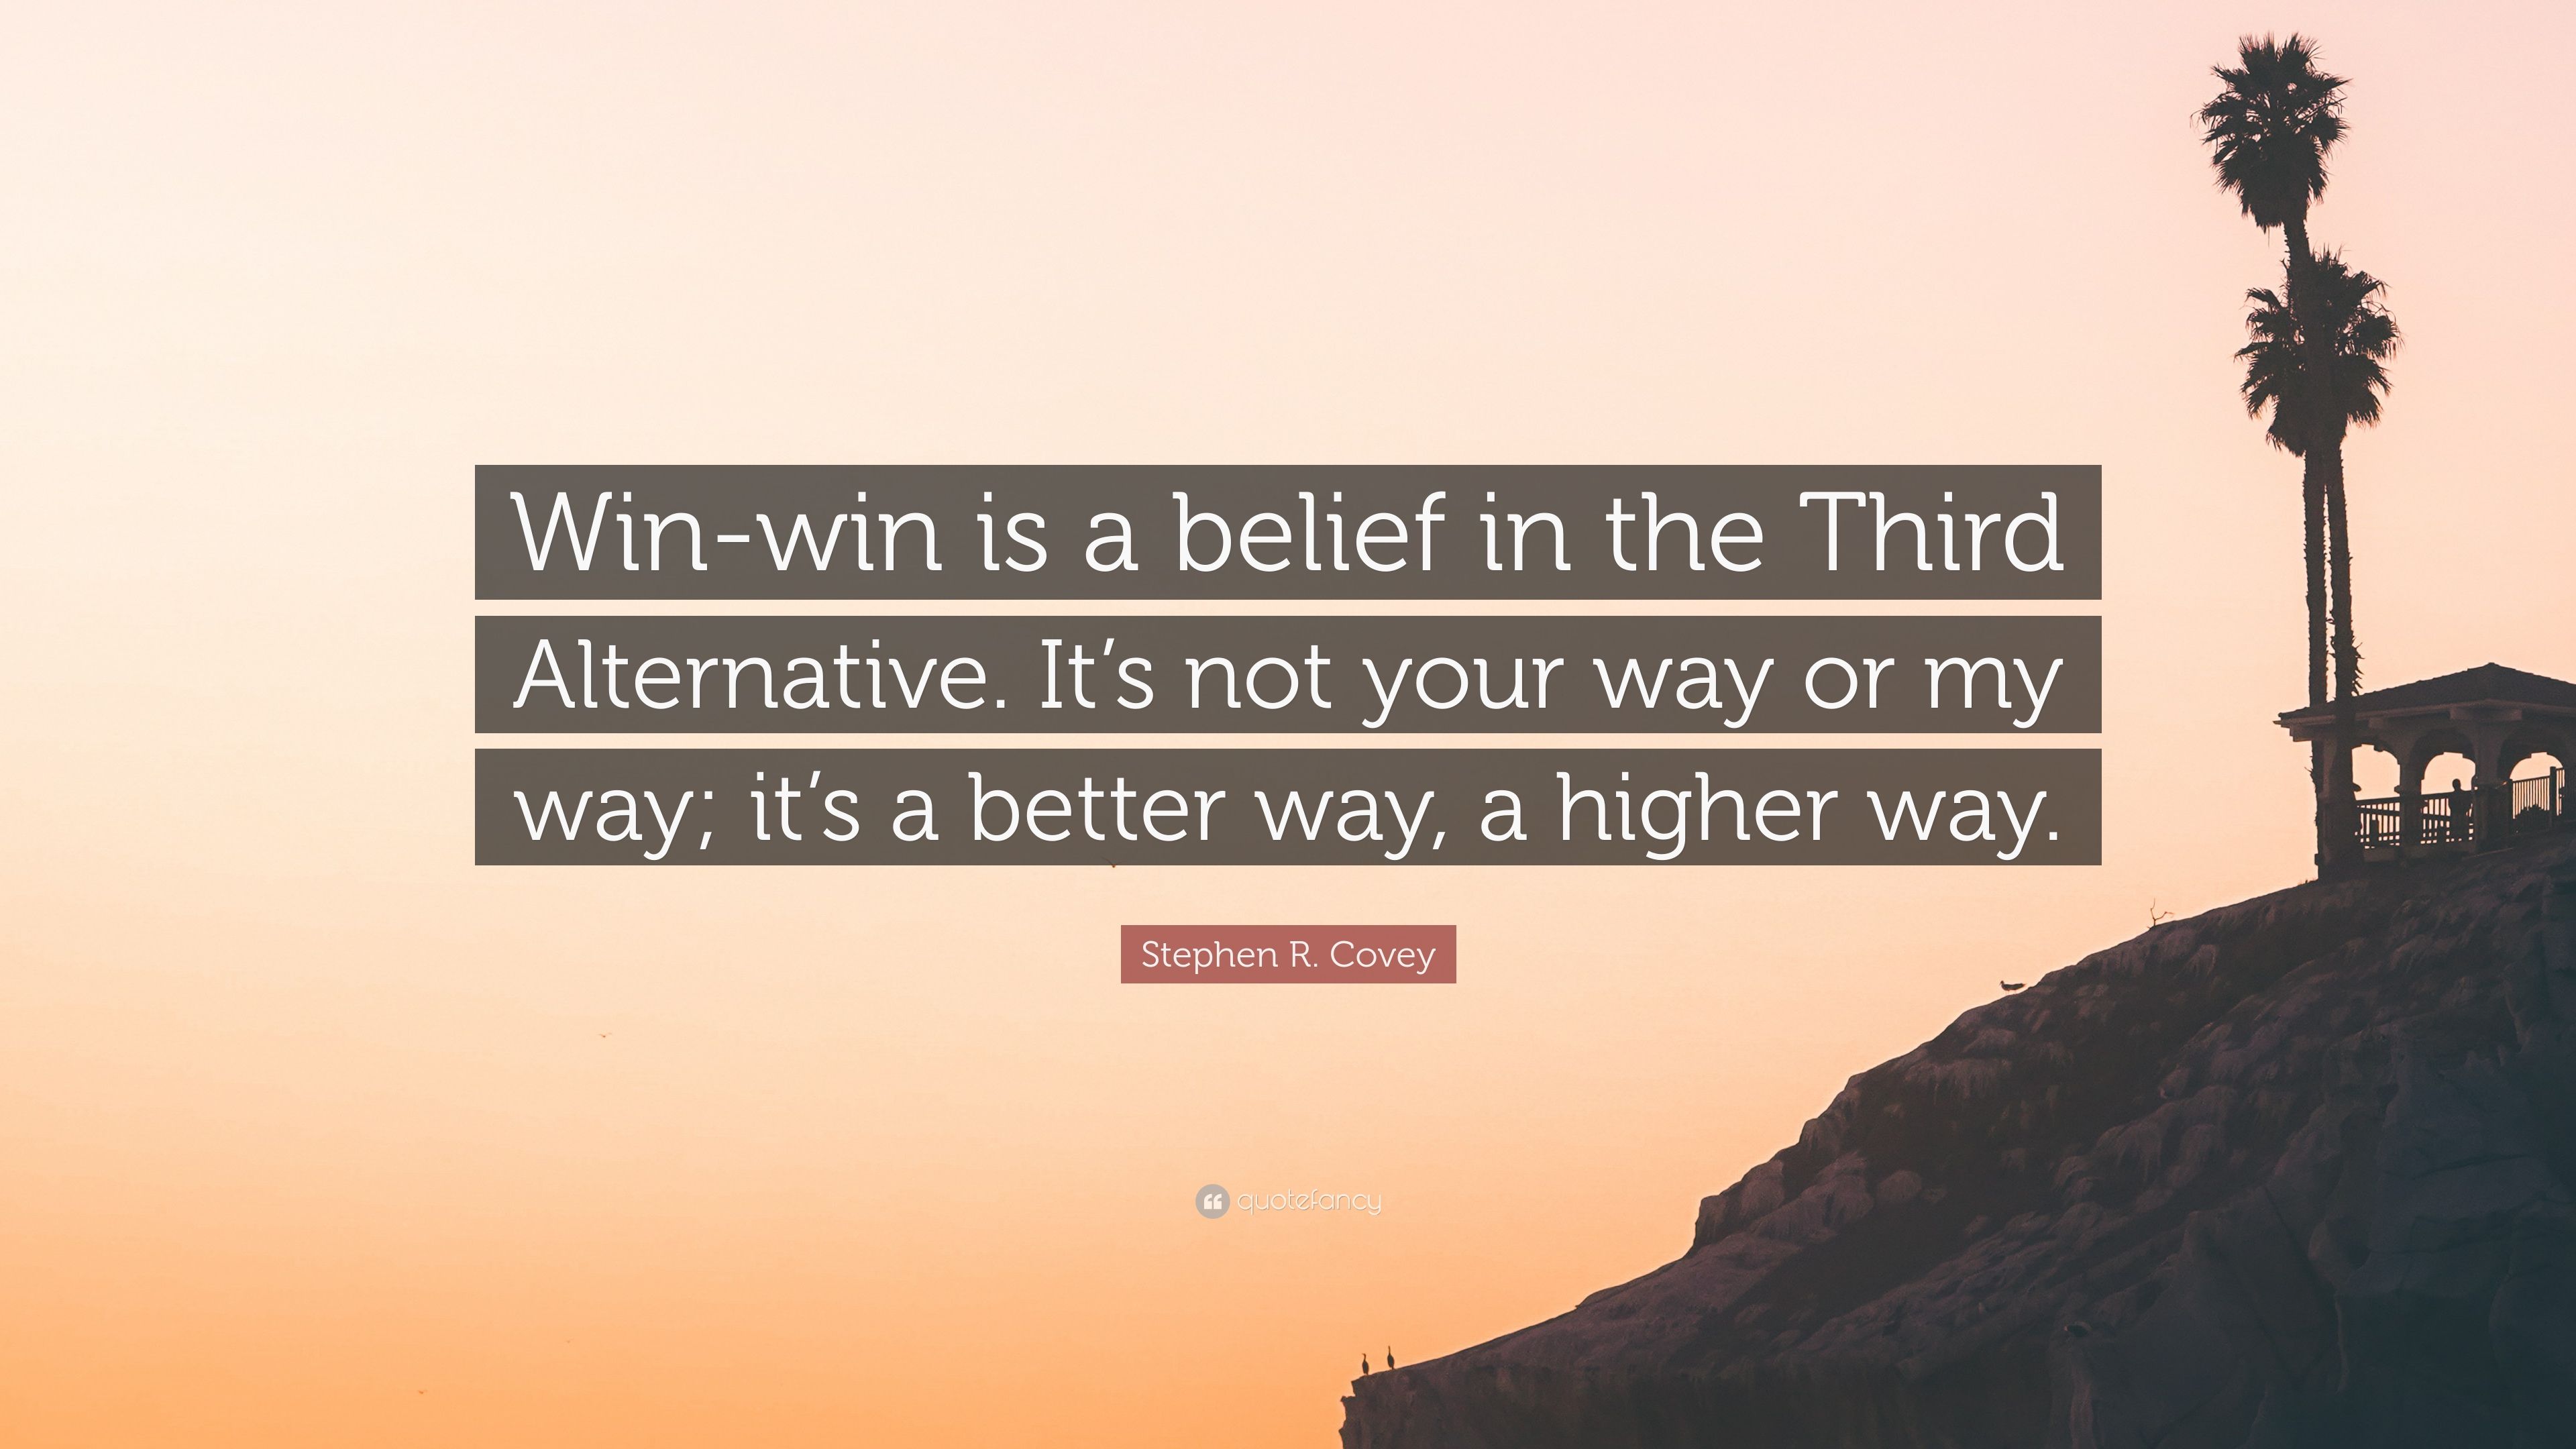 5169508-Stephen-R-Covey-Quote-Win-win-is-a-belief-in-the-Third-Alternative